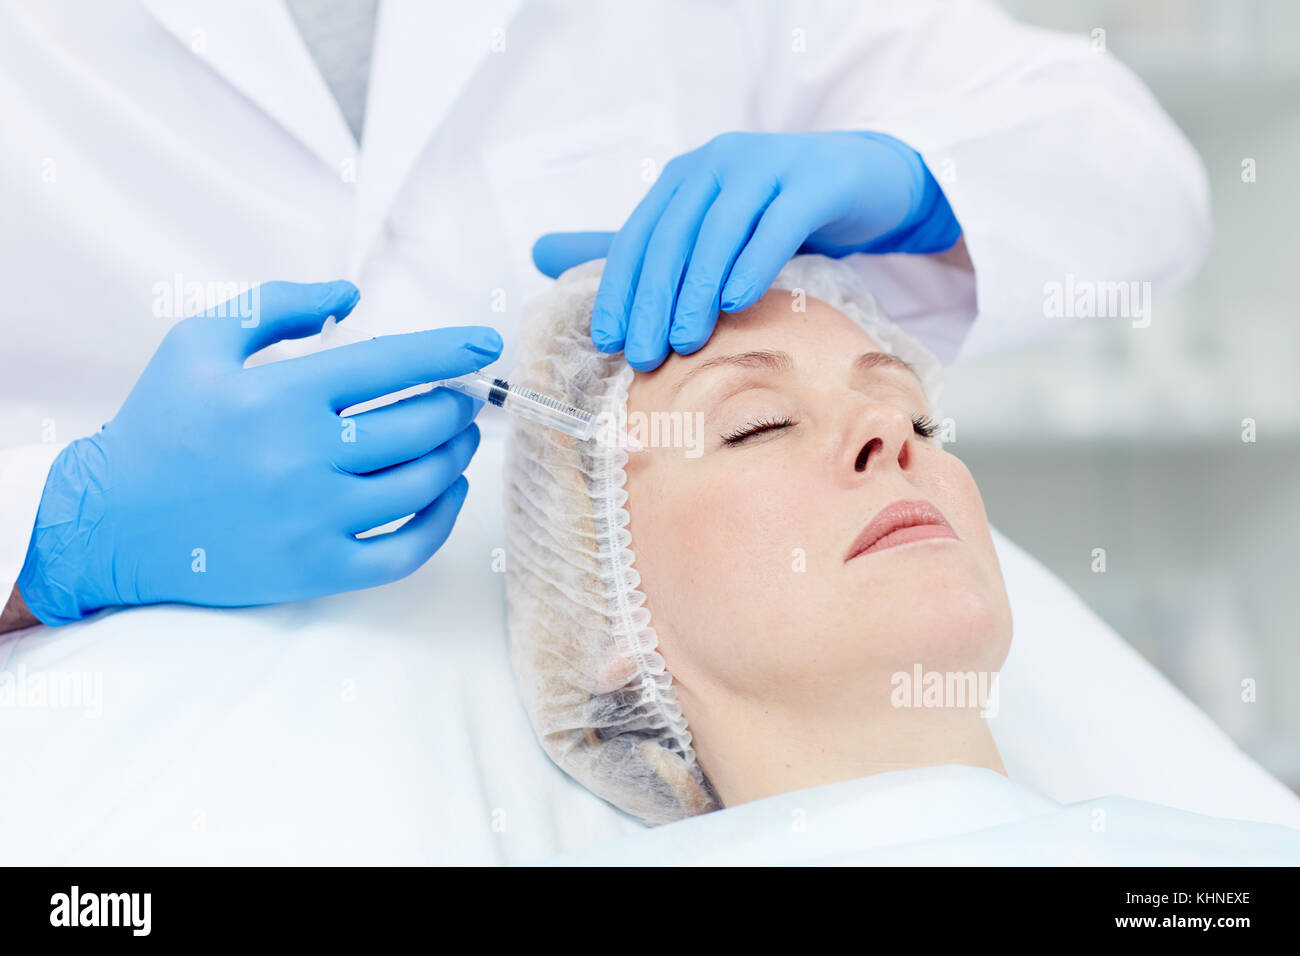 Plastic surgeon making botox injection in temple of his aging patient Stock Photo